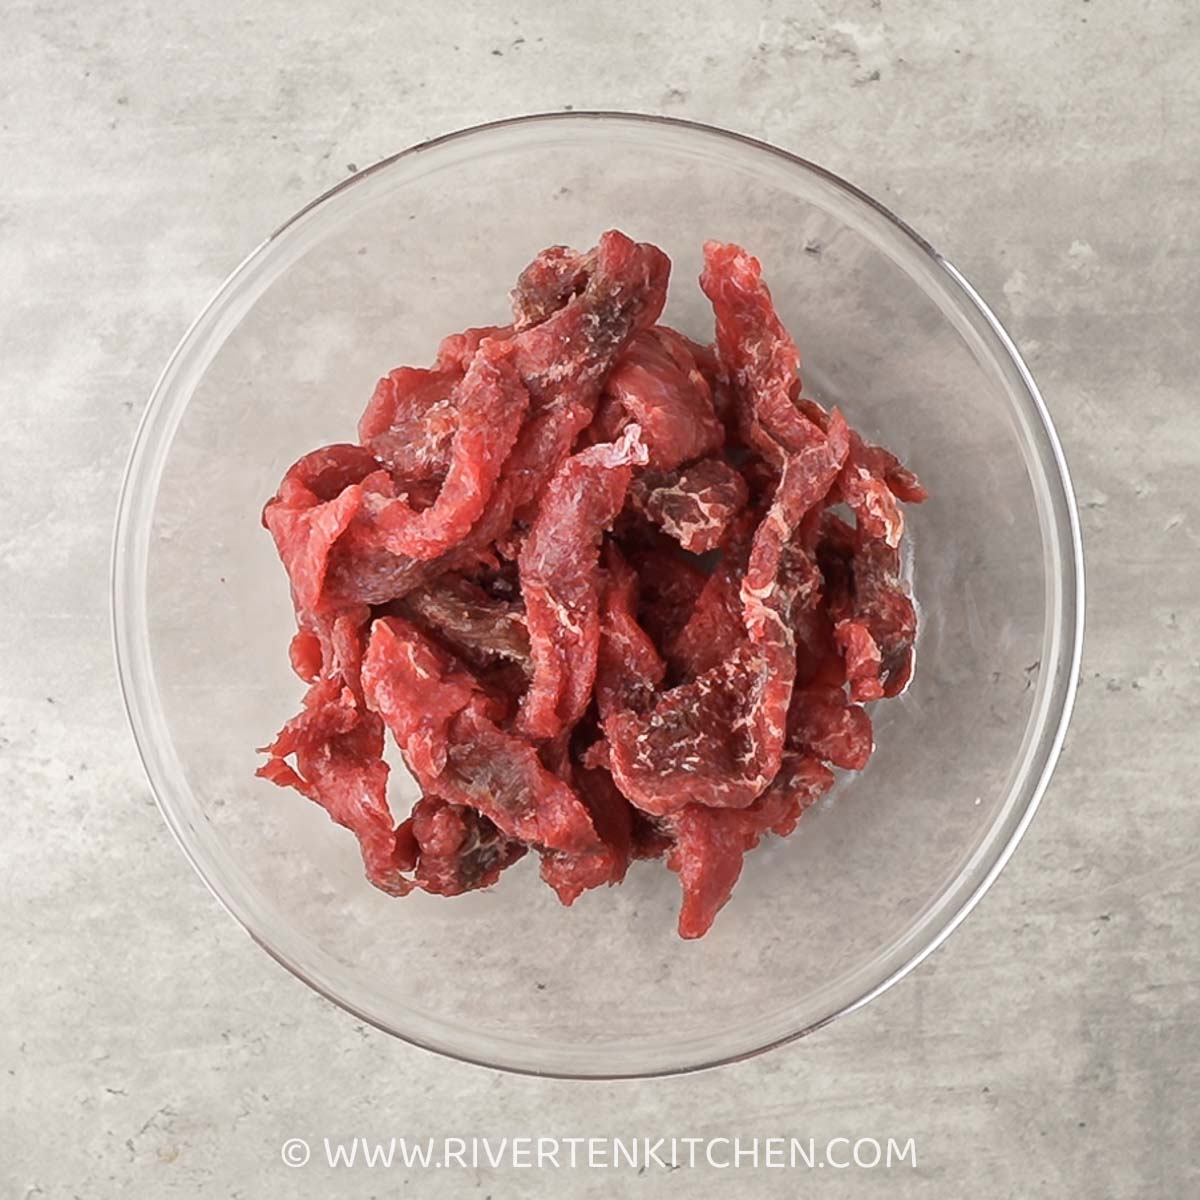 thin slices of beef for stir-frying